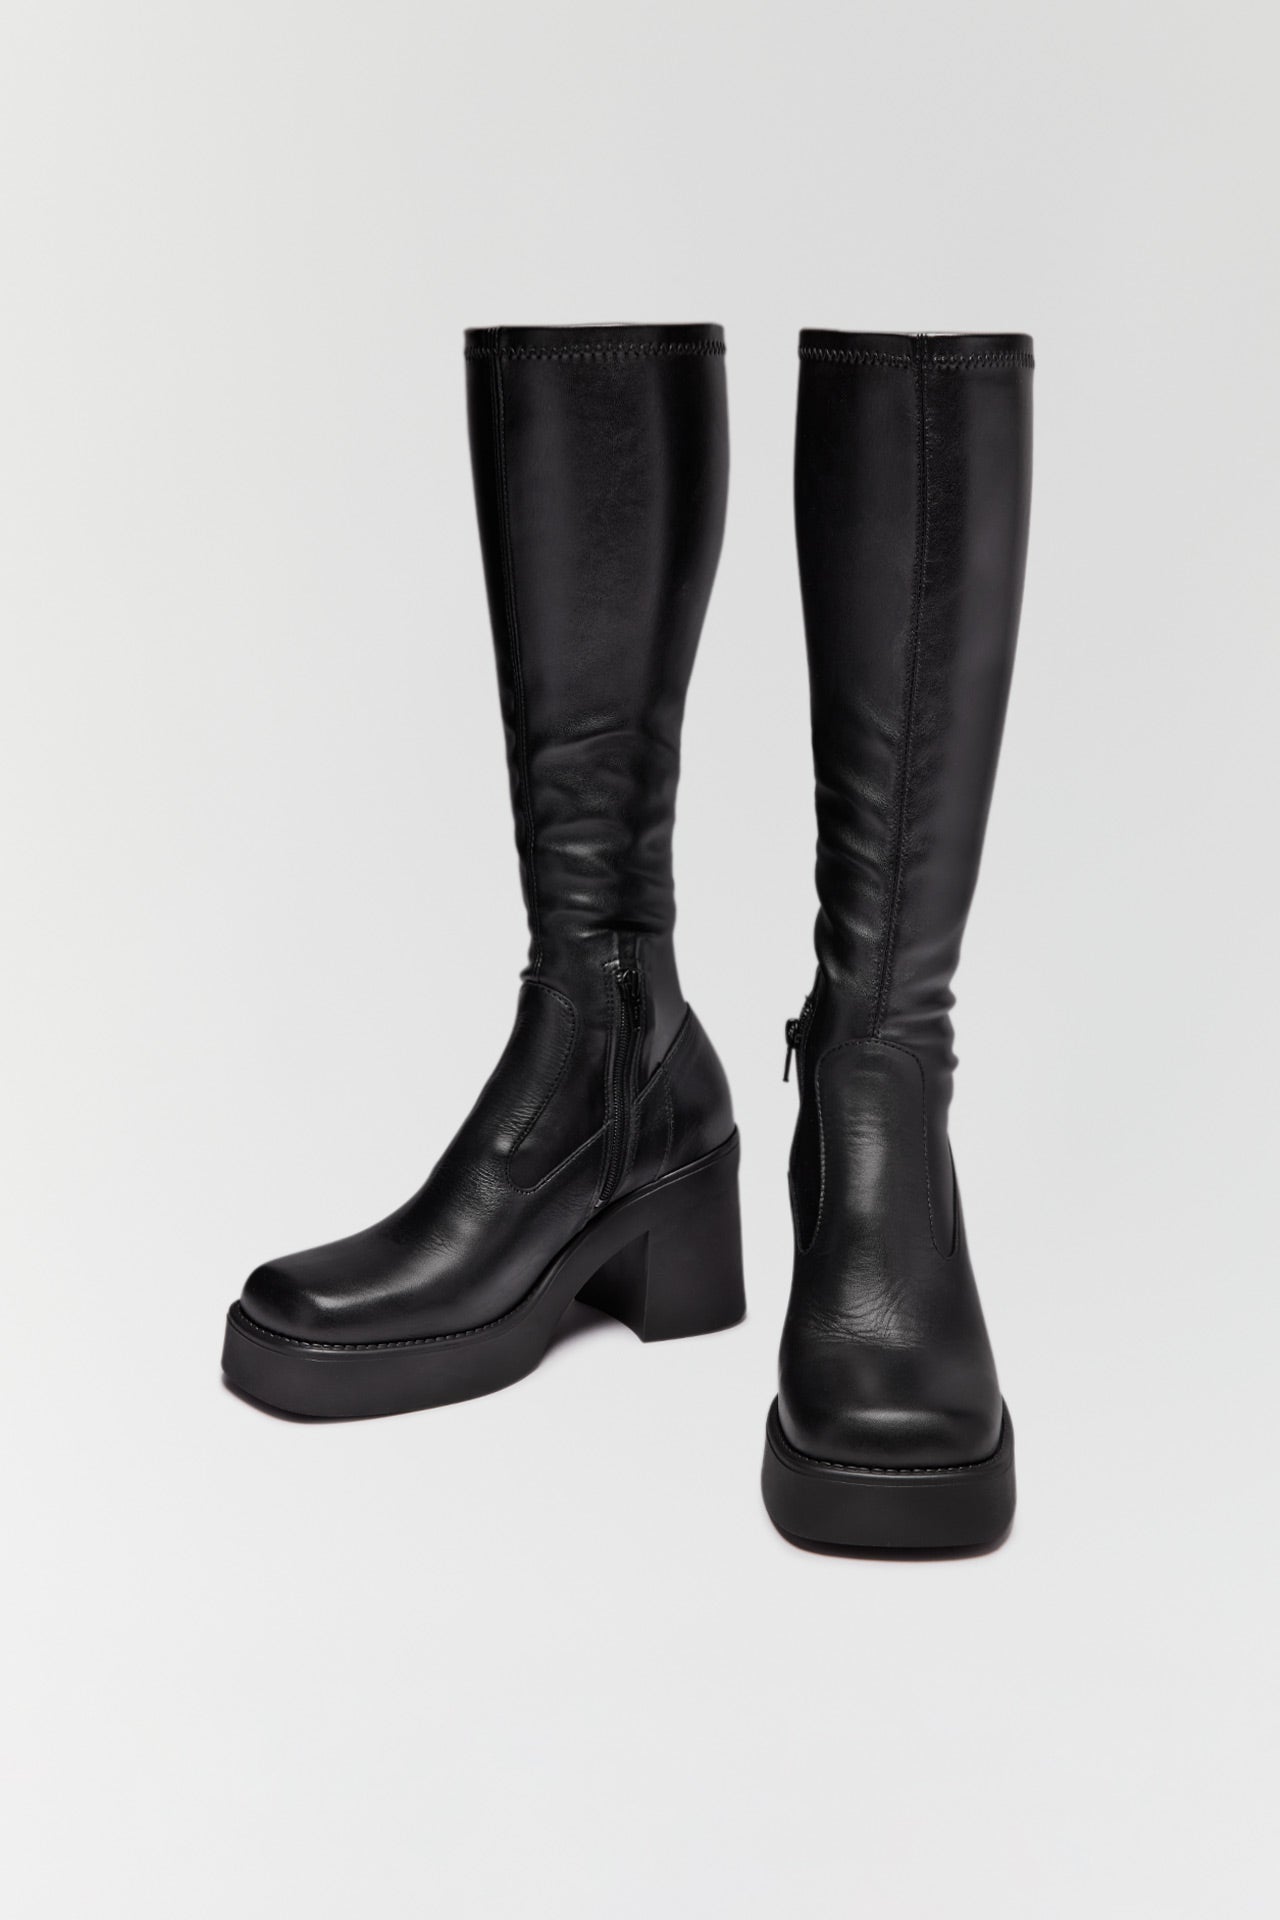 Norma Black Boots